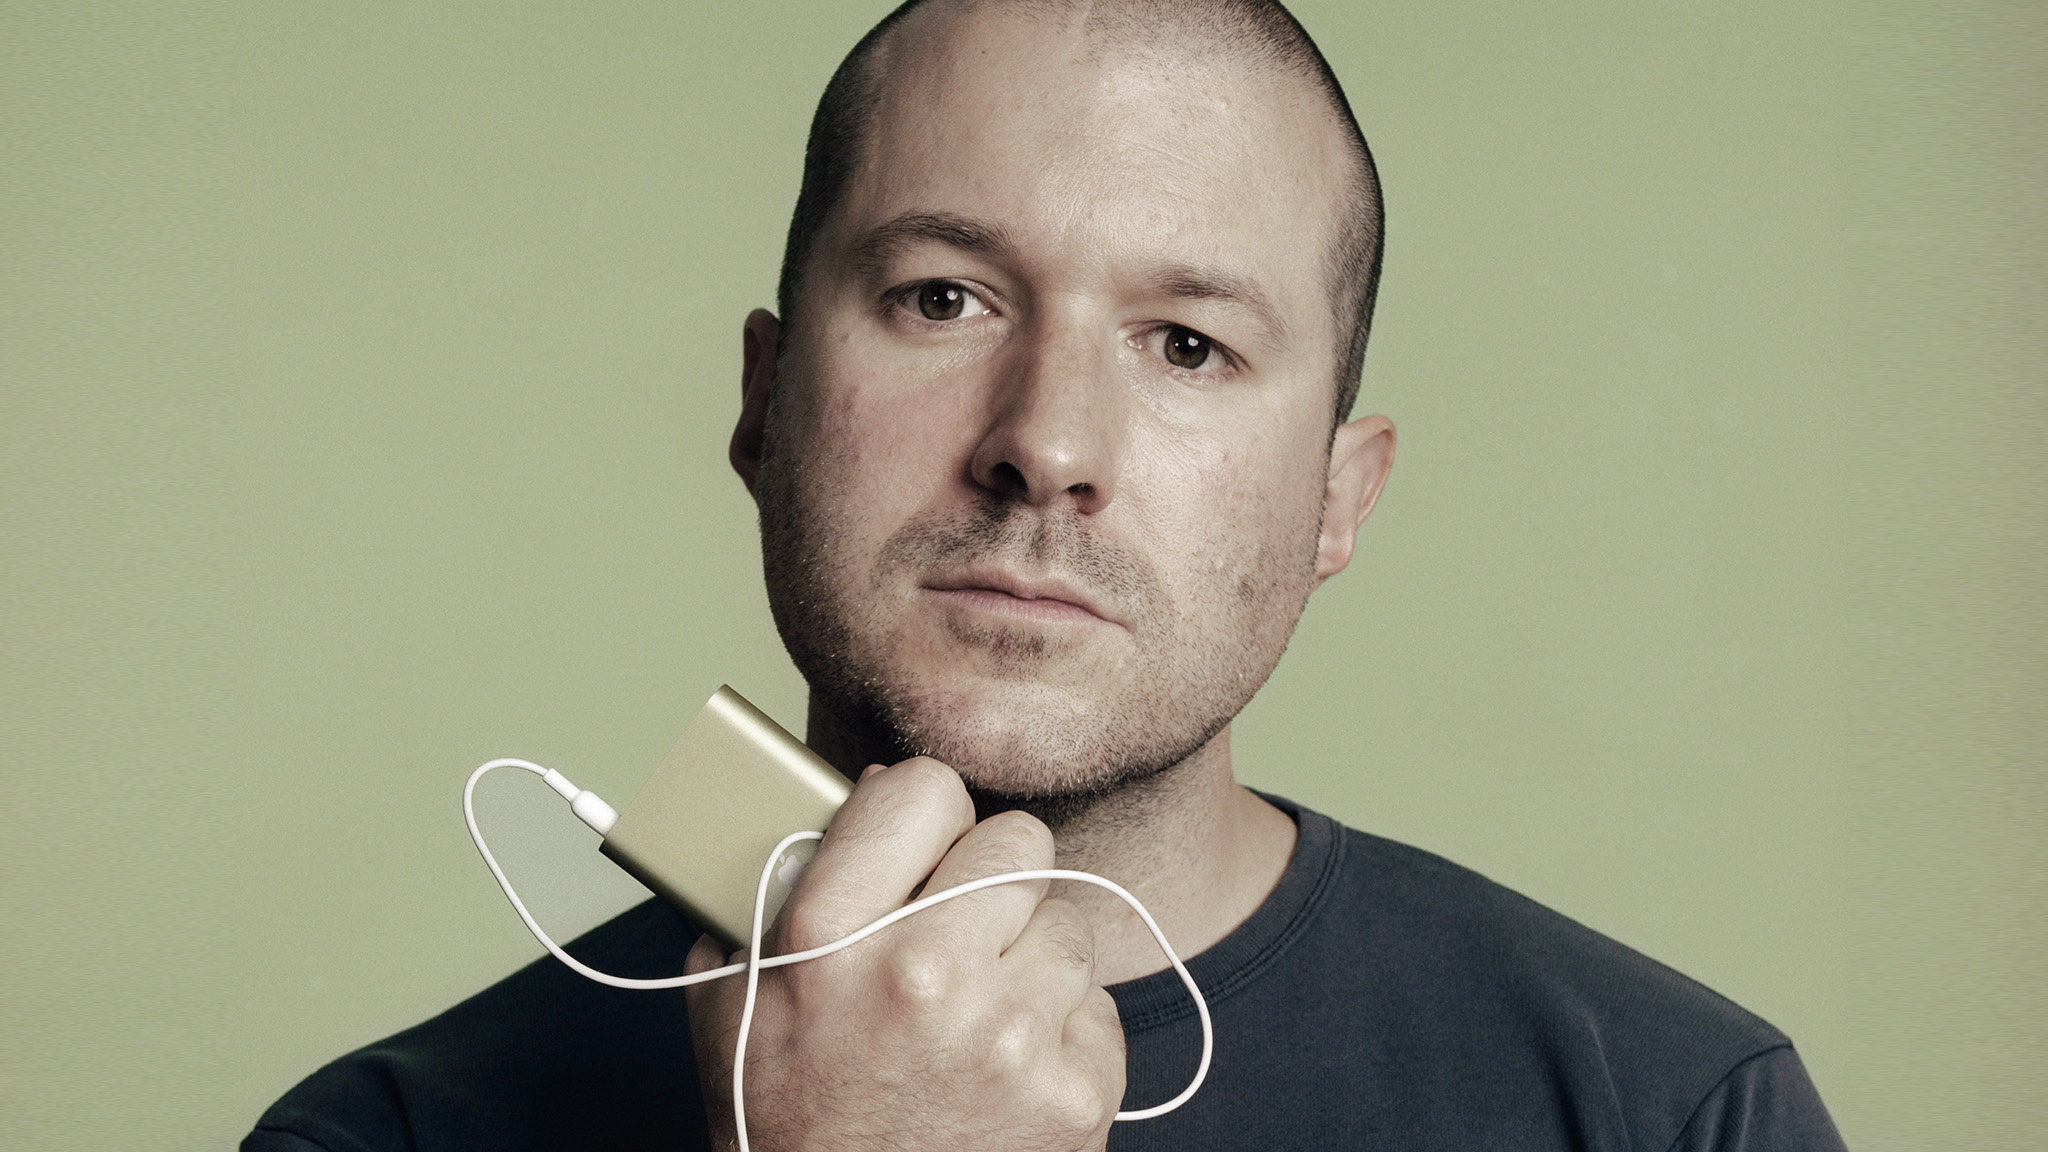 Apple bids farewell to Jony Ive as he left for 'LoveFrom'